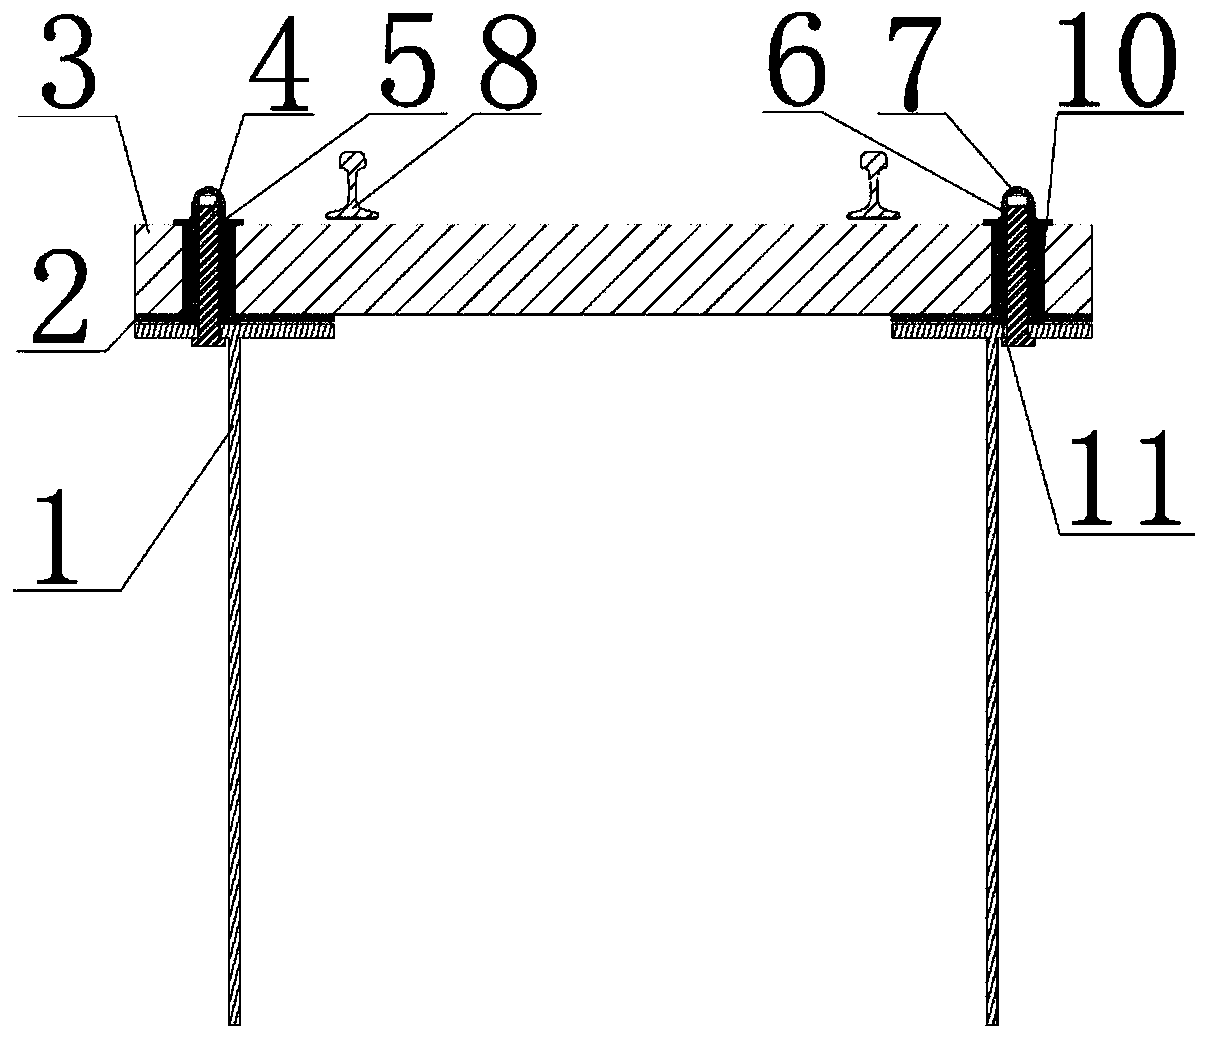 Fully-prefabricated assembly type rail structure on steel truss beam